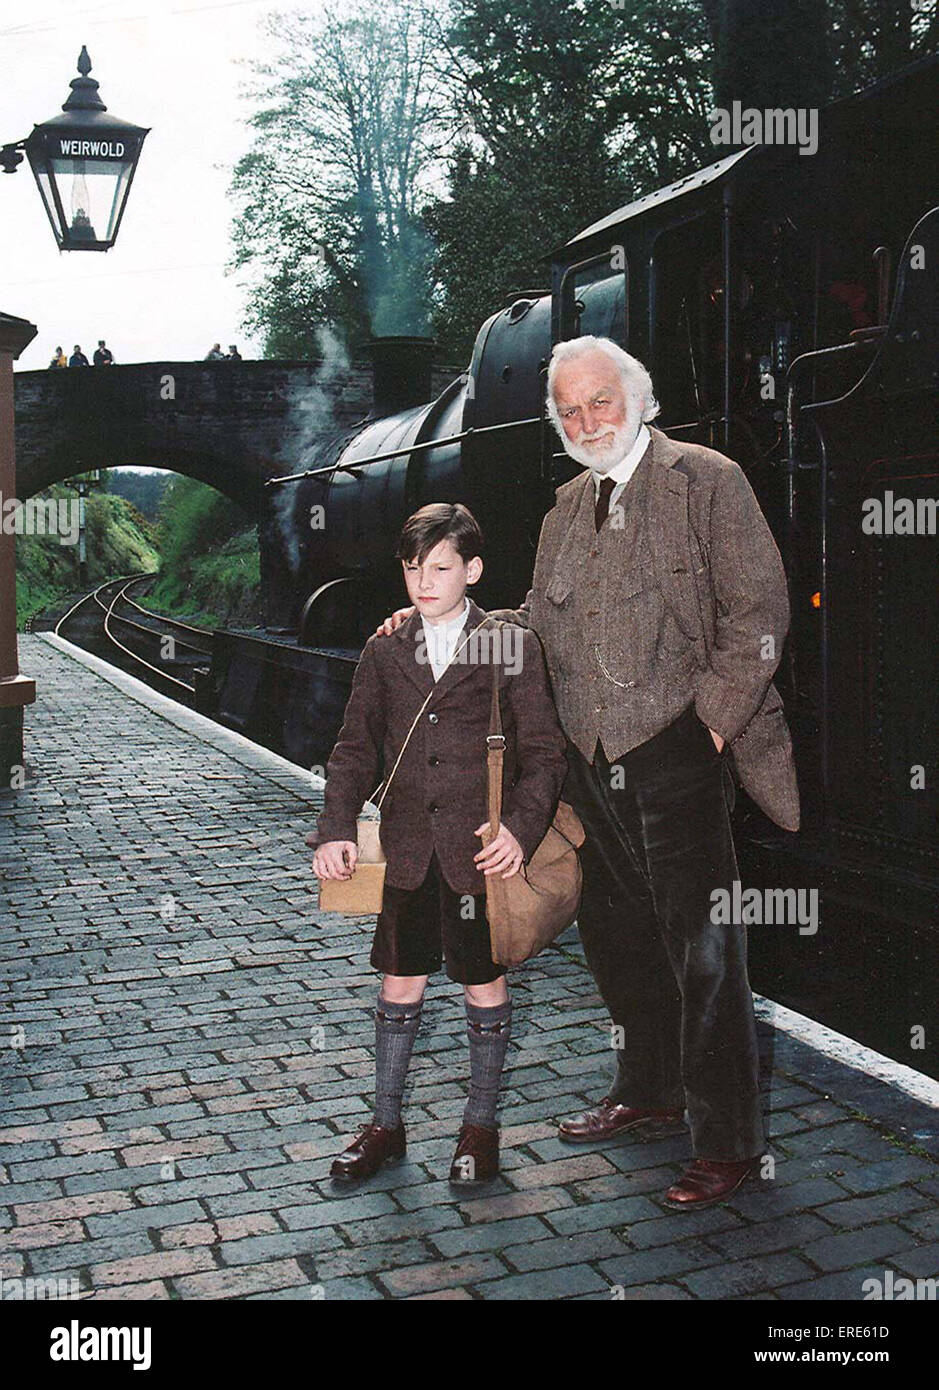 John Thaw filming Good Night Mr Tom on Arley Station Worcestershire on The  Severn Valley Steam Railway in April 1998 Stock Photo - Alamy